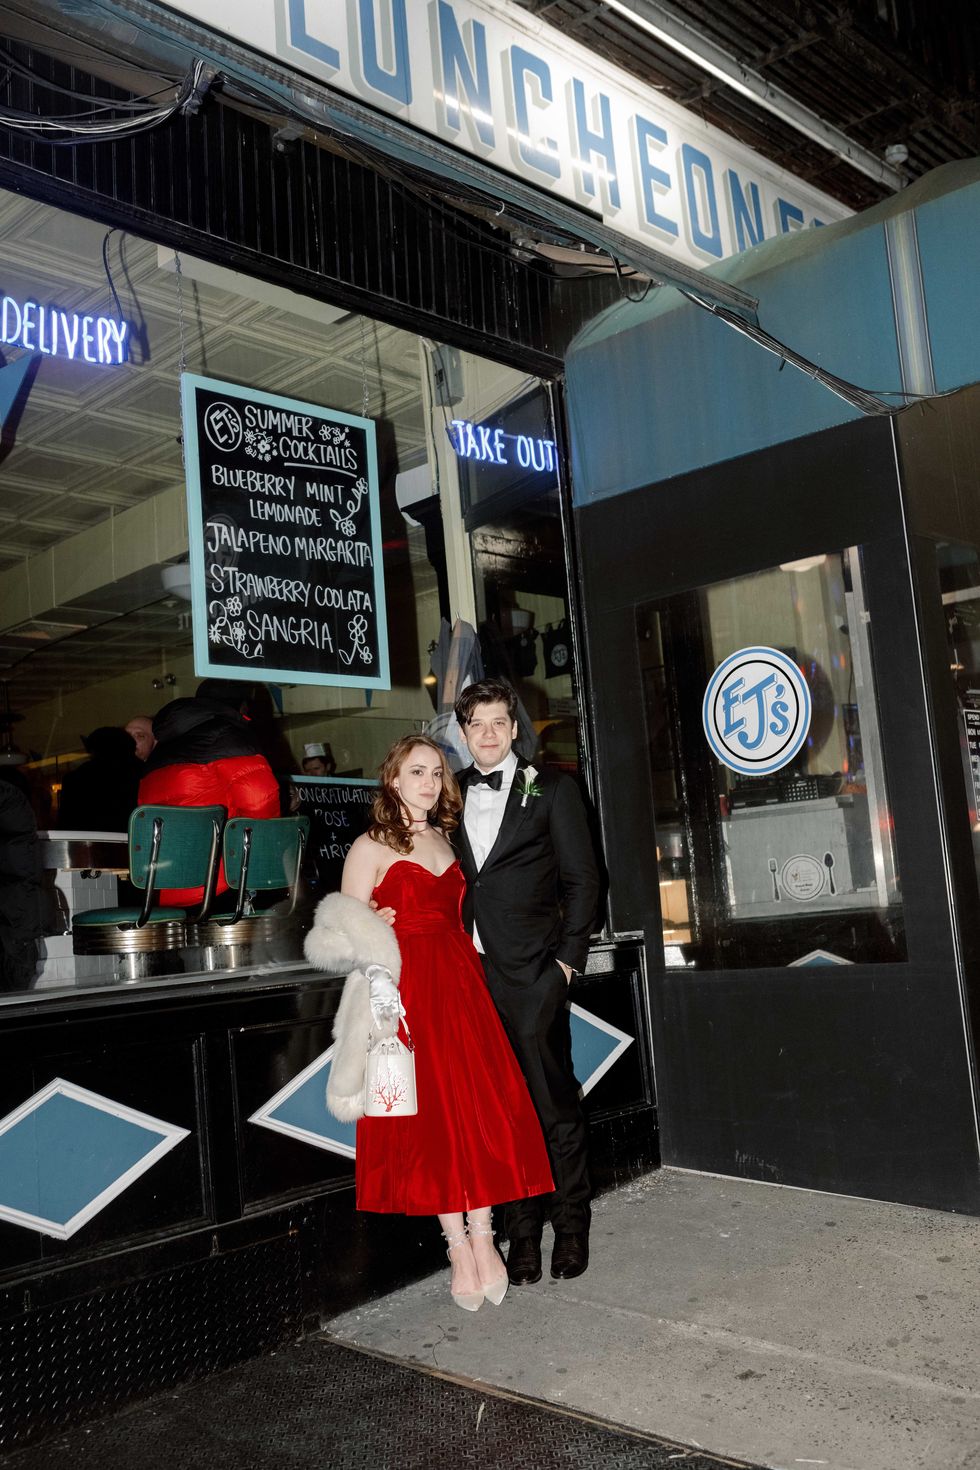 a man and woman posing for a picture in front of a store